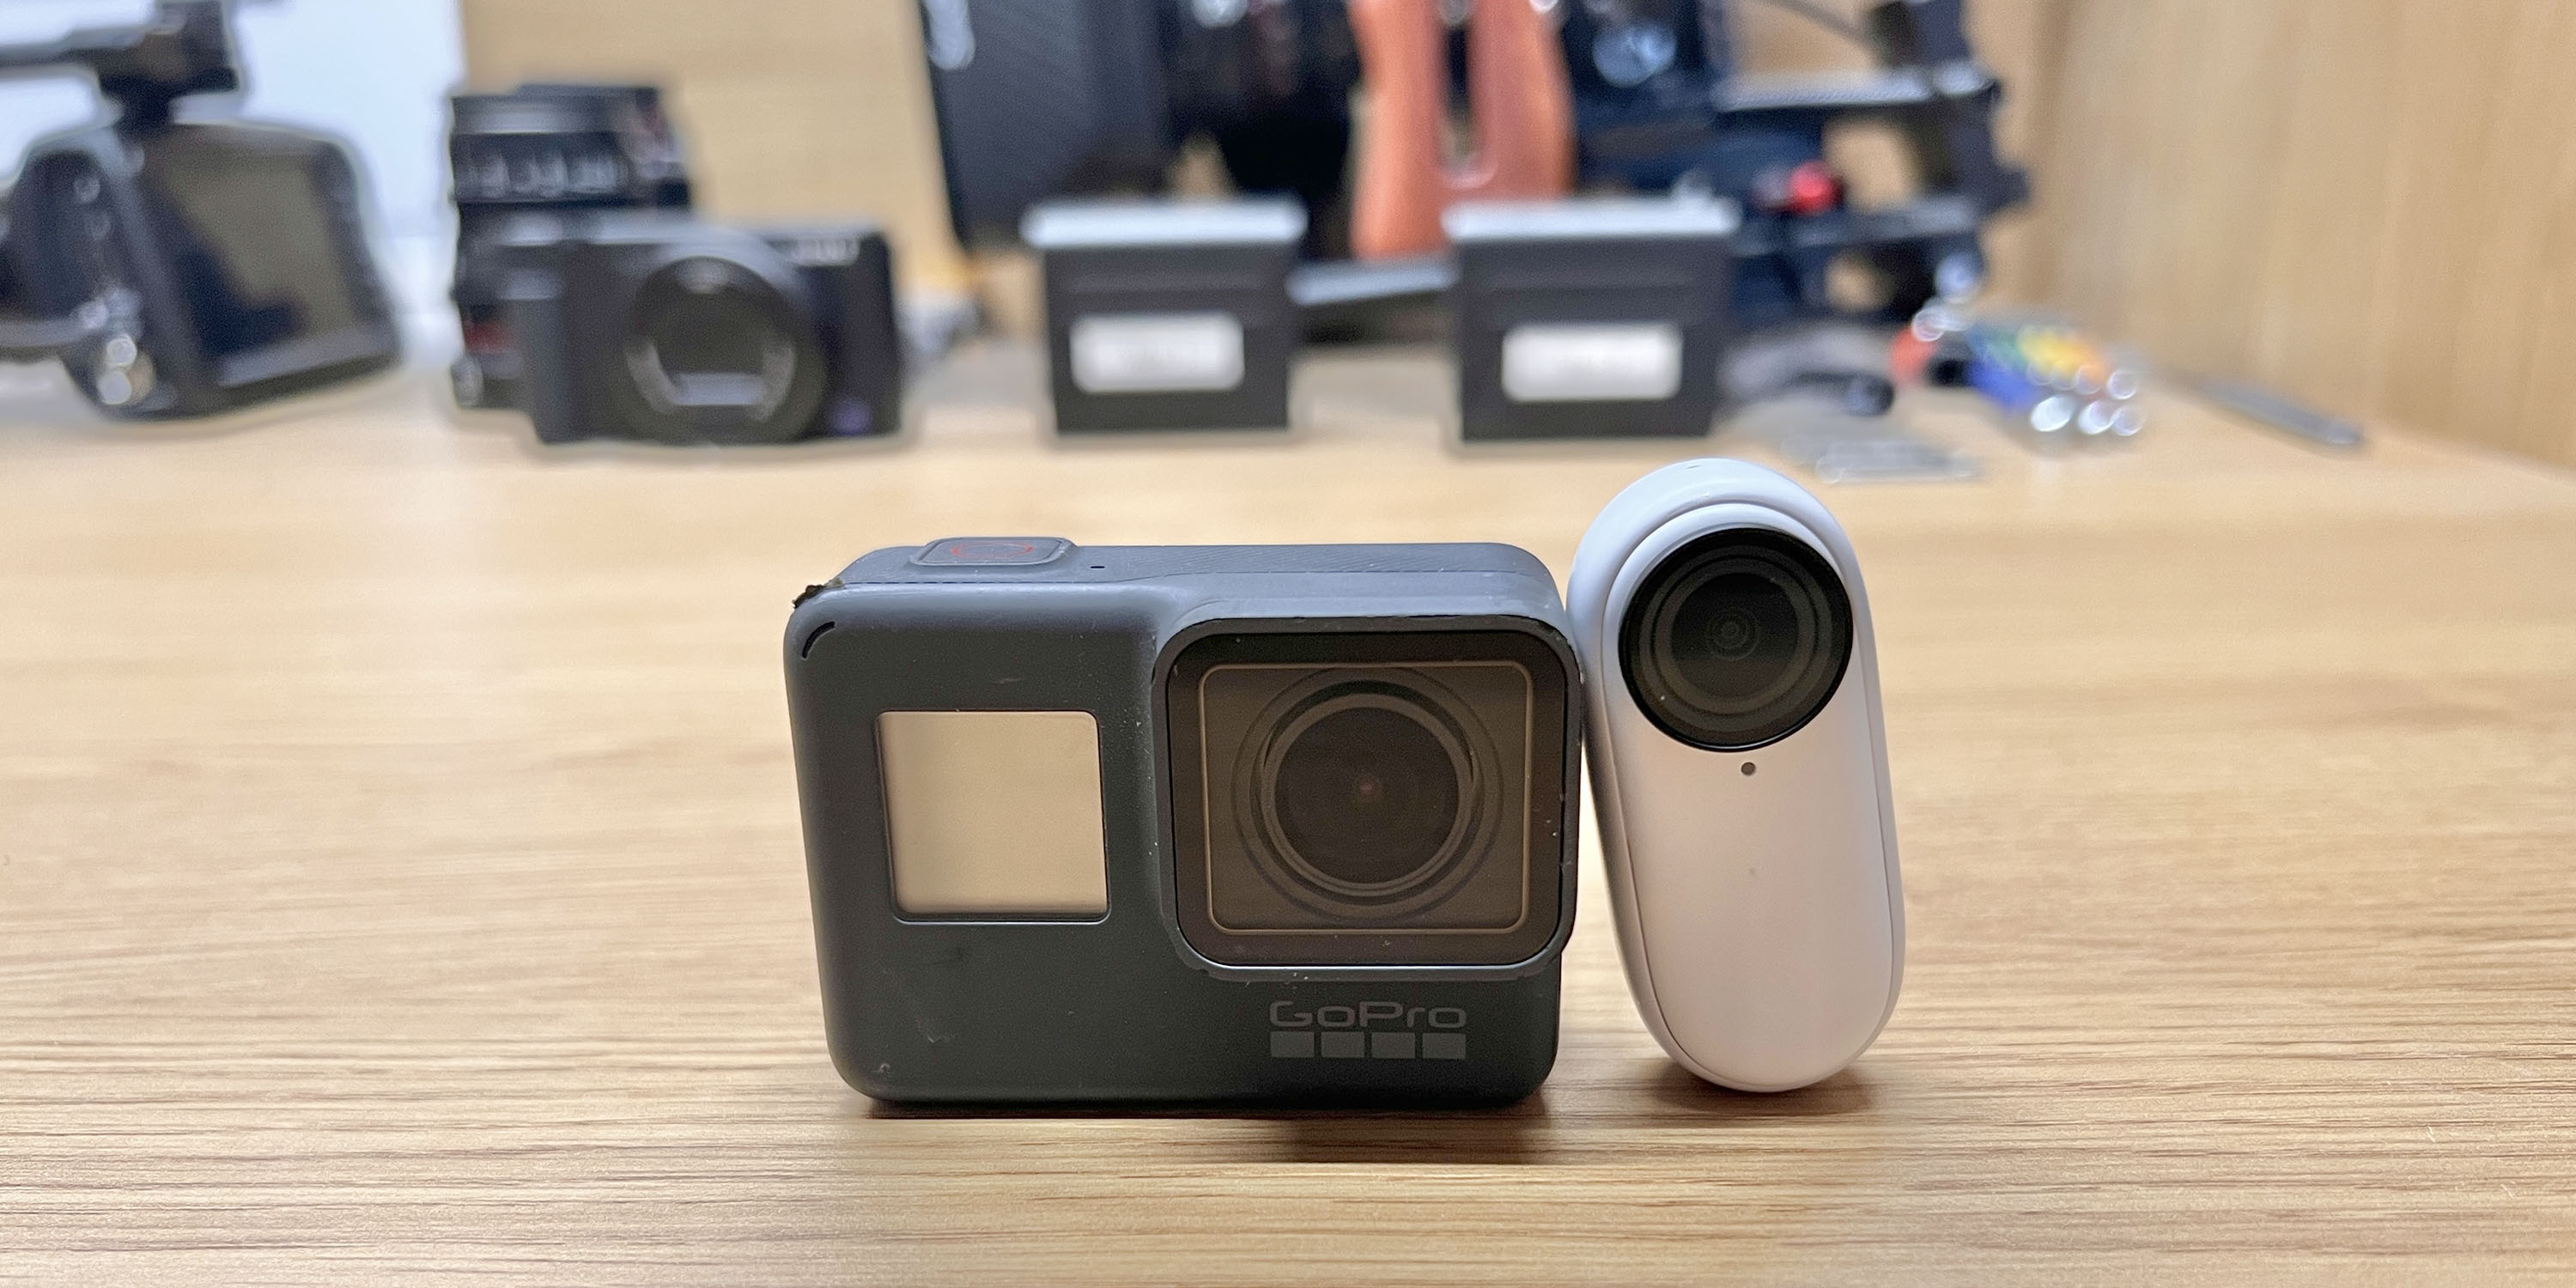 Insta360 Go 2 action camera makes a GoPro look huge - 9to5Mac